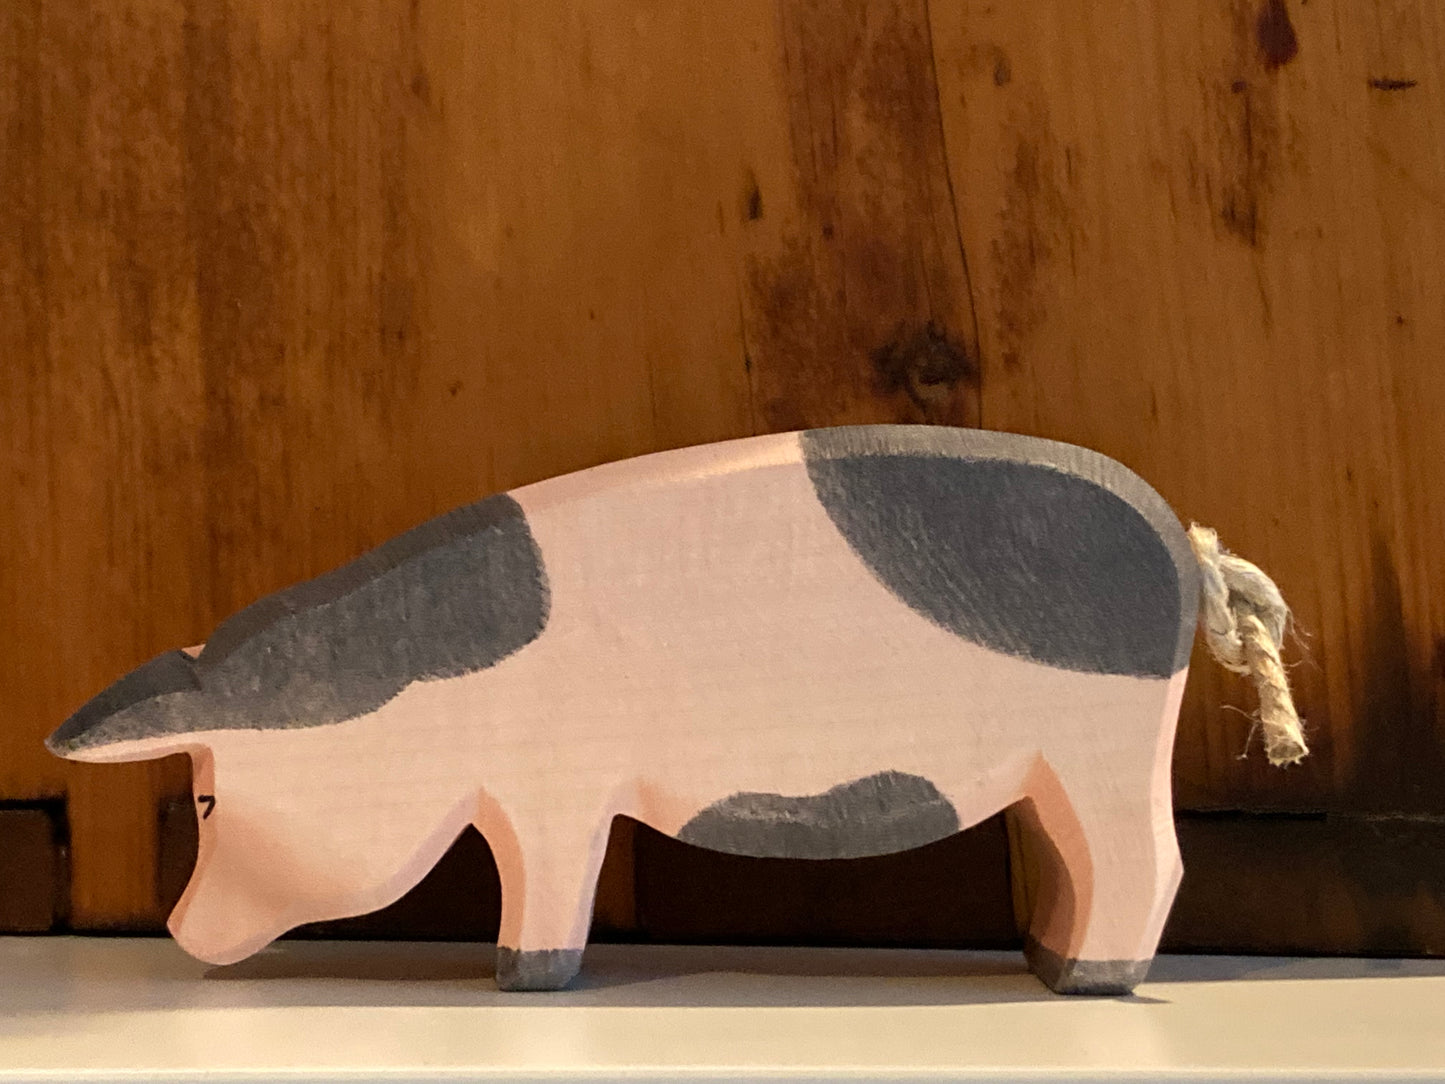 Wooden Dollhouse Play - SPOTTED PIG